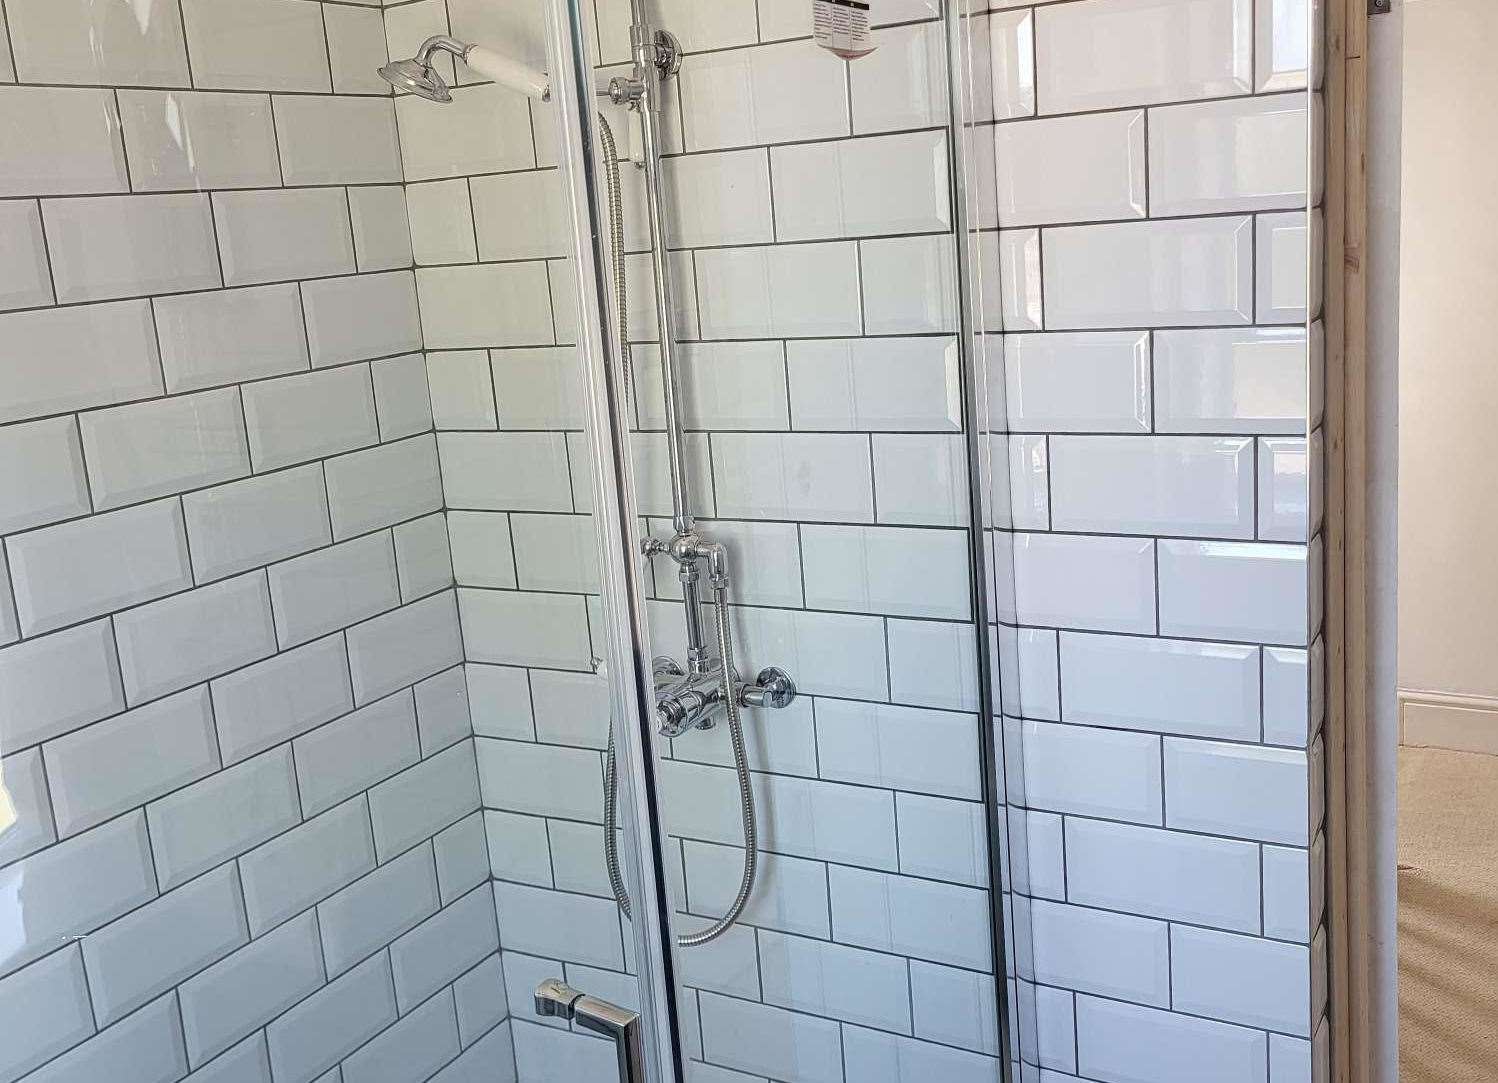 The shower has been "unusable" for seven weeks